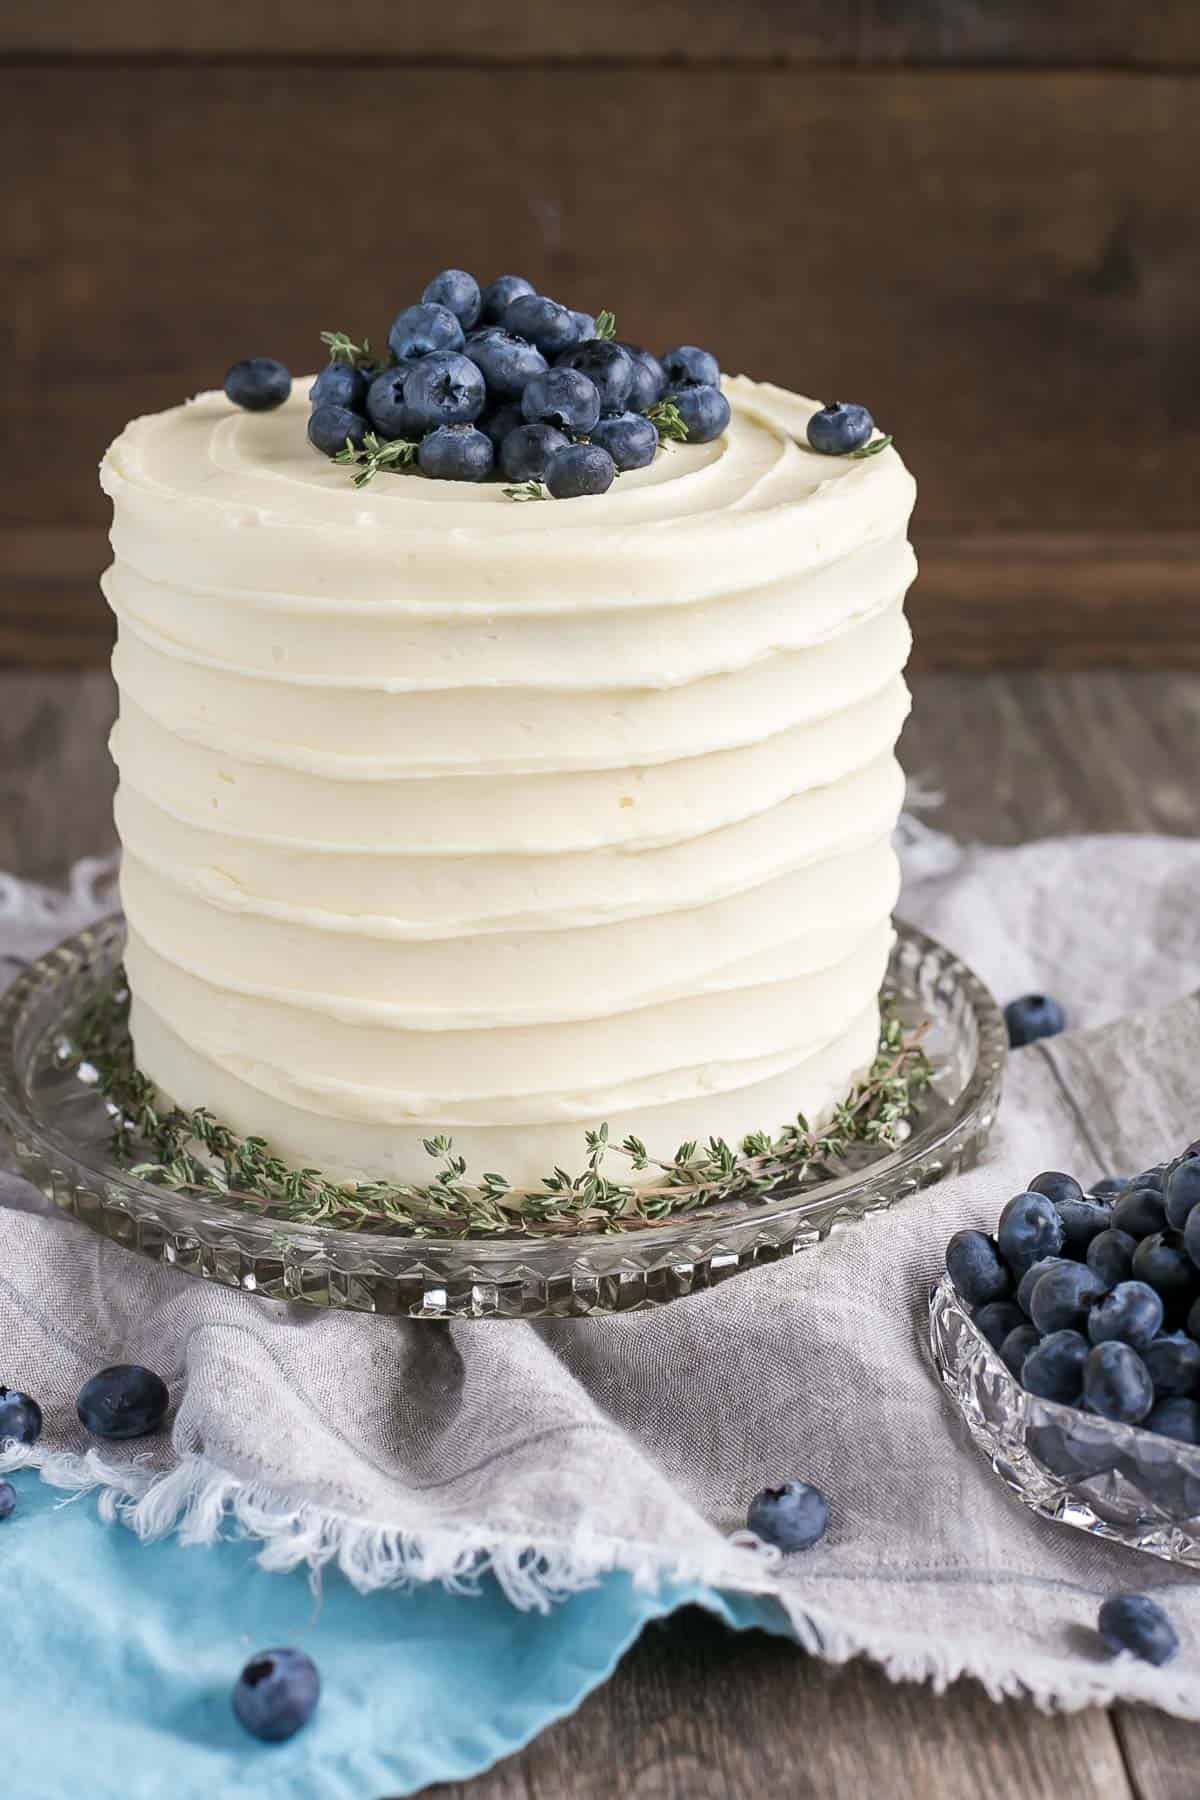 Blueberry Banana Cake with Cream Cheese Frosting